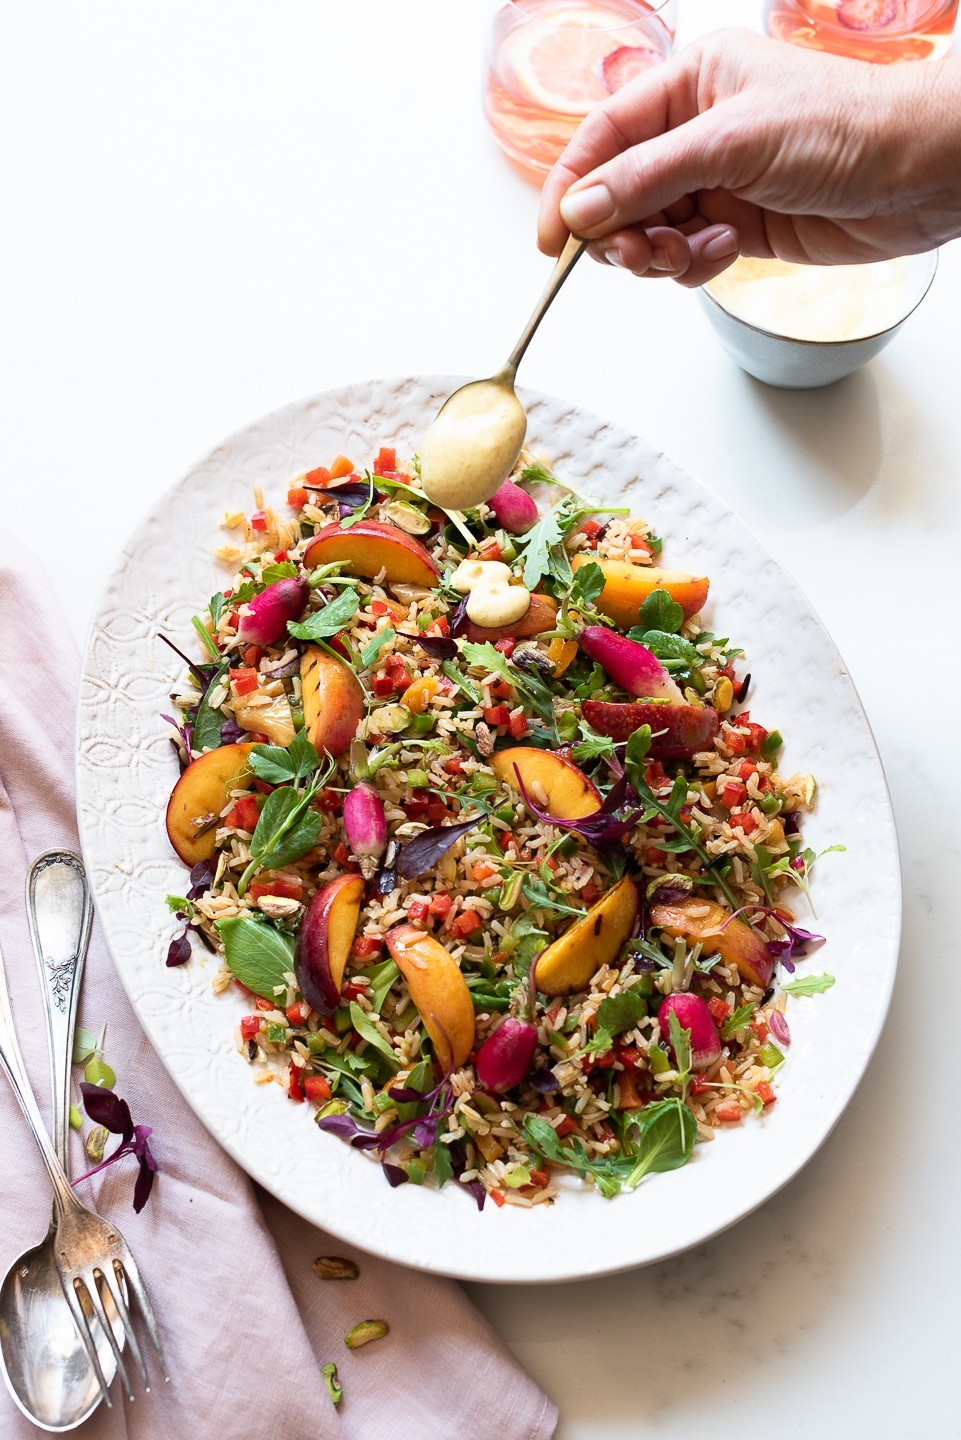 Wild rice salad with sweet peppers